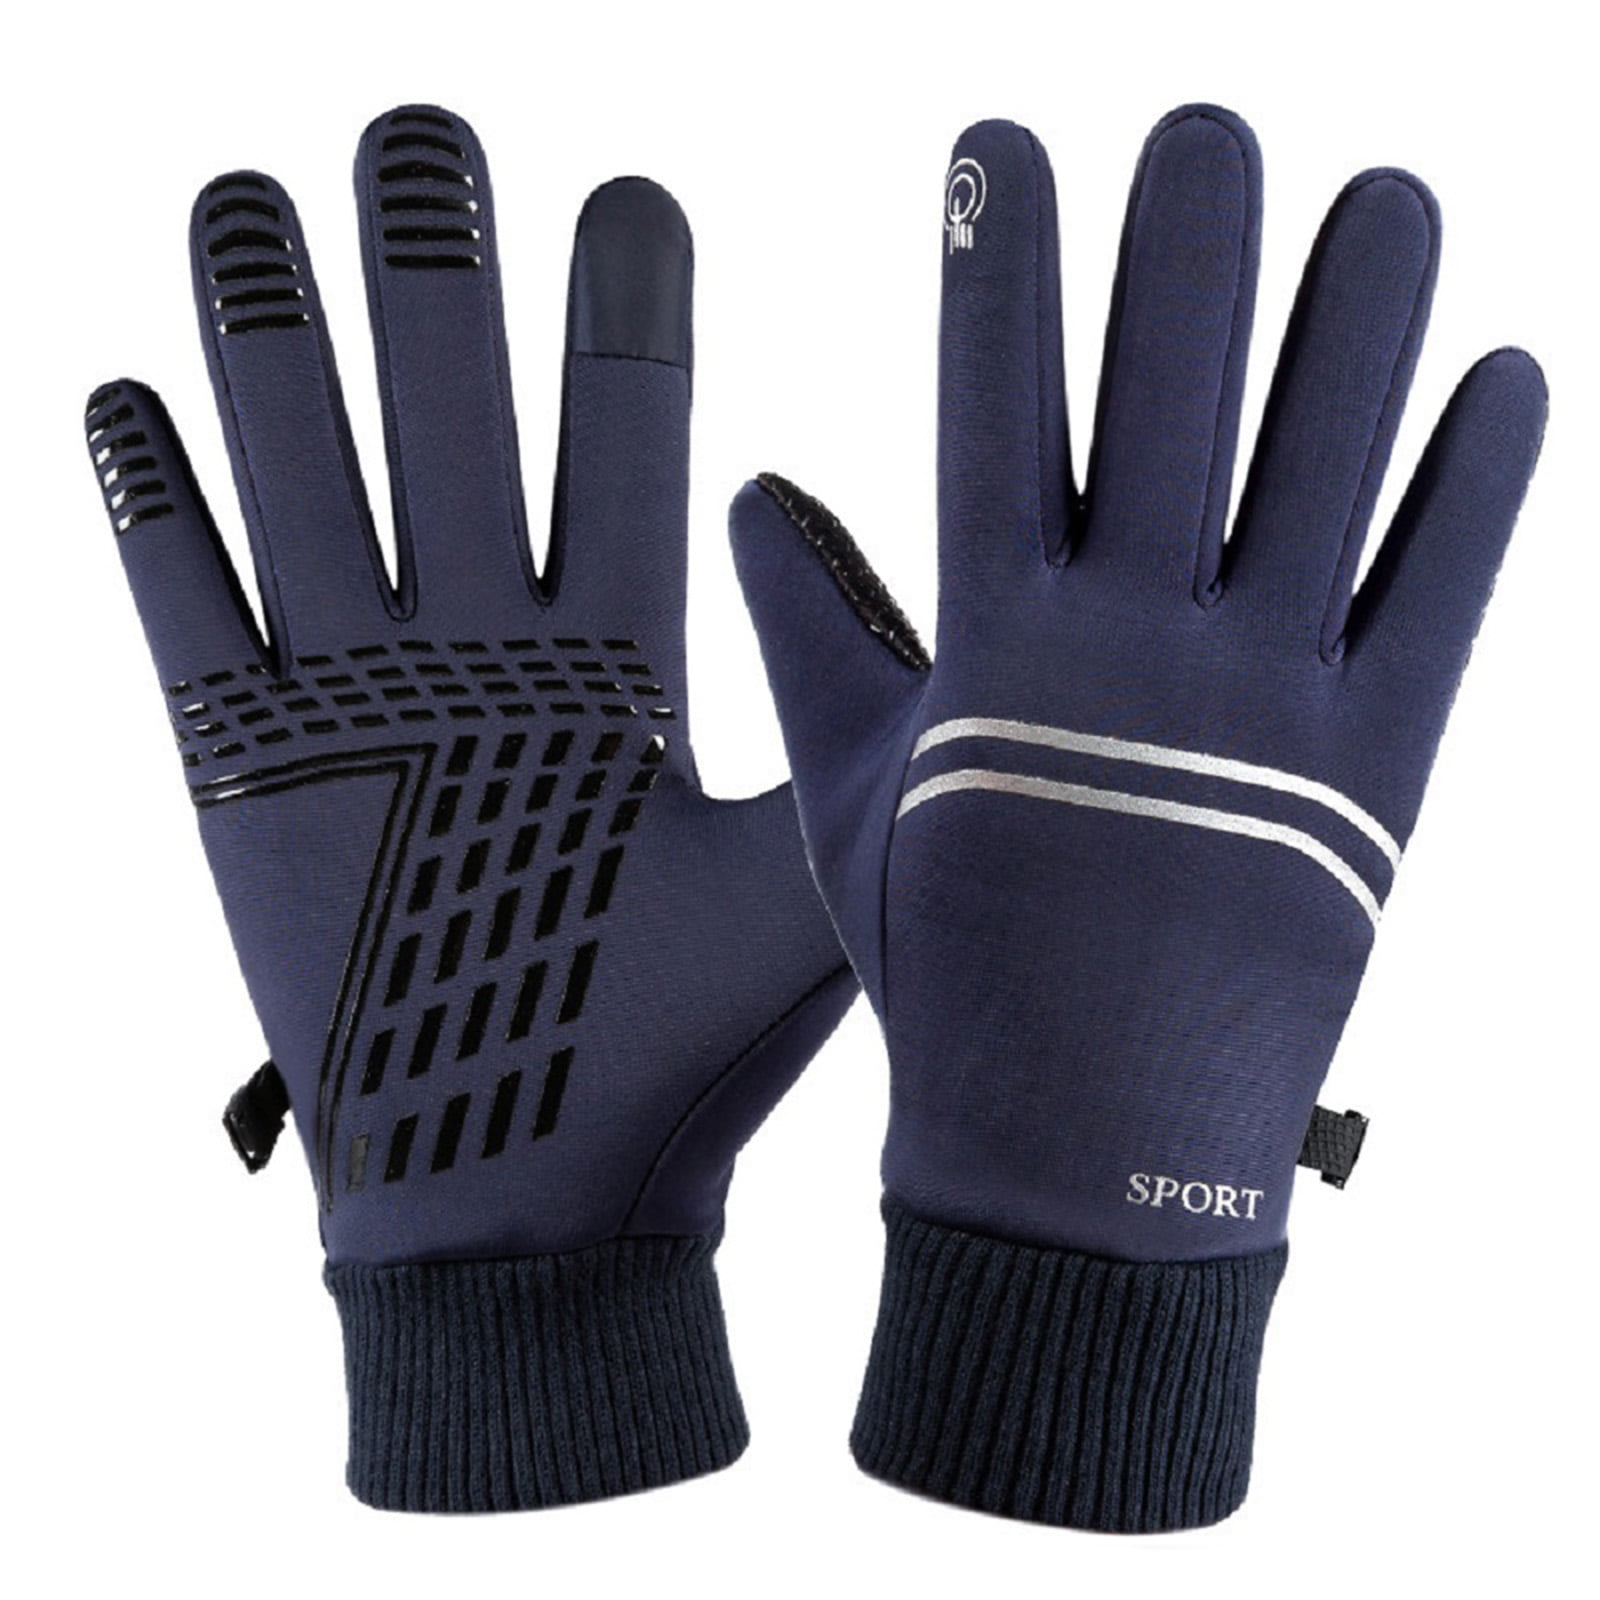 Windproof Water-Resistant Running Gloves Men Women Driving Running Cycling Climbing Hiking Skiing Non-Slip Elastic Cuff Cycling Gloves TANSTC Winter Warm Gloves Touchscreen Thermal Gloves